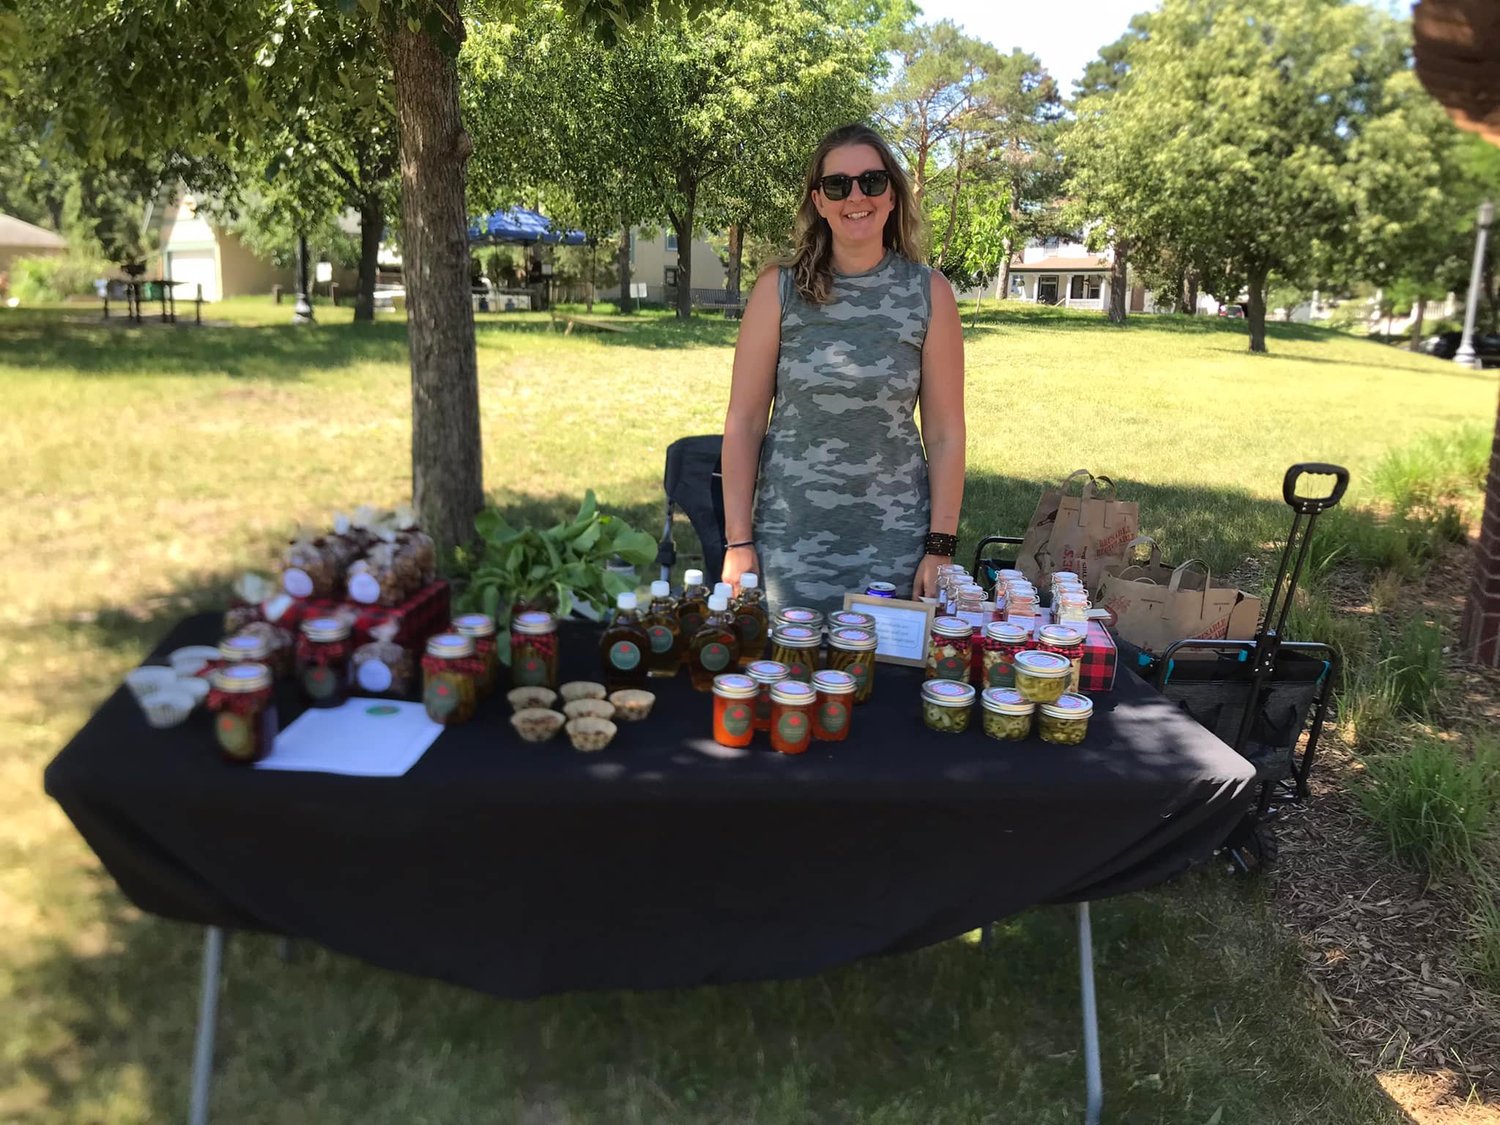 Barb Koloshuk, the owner of Lake Seven Orchards, sells homemade pickled beets, pickled peppers, maple syrup and more at the first Twin Cities Community Pop-Up Market at Mueller Park on June 18.